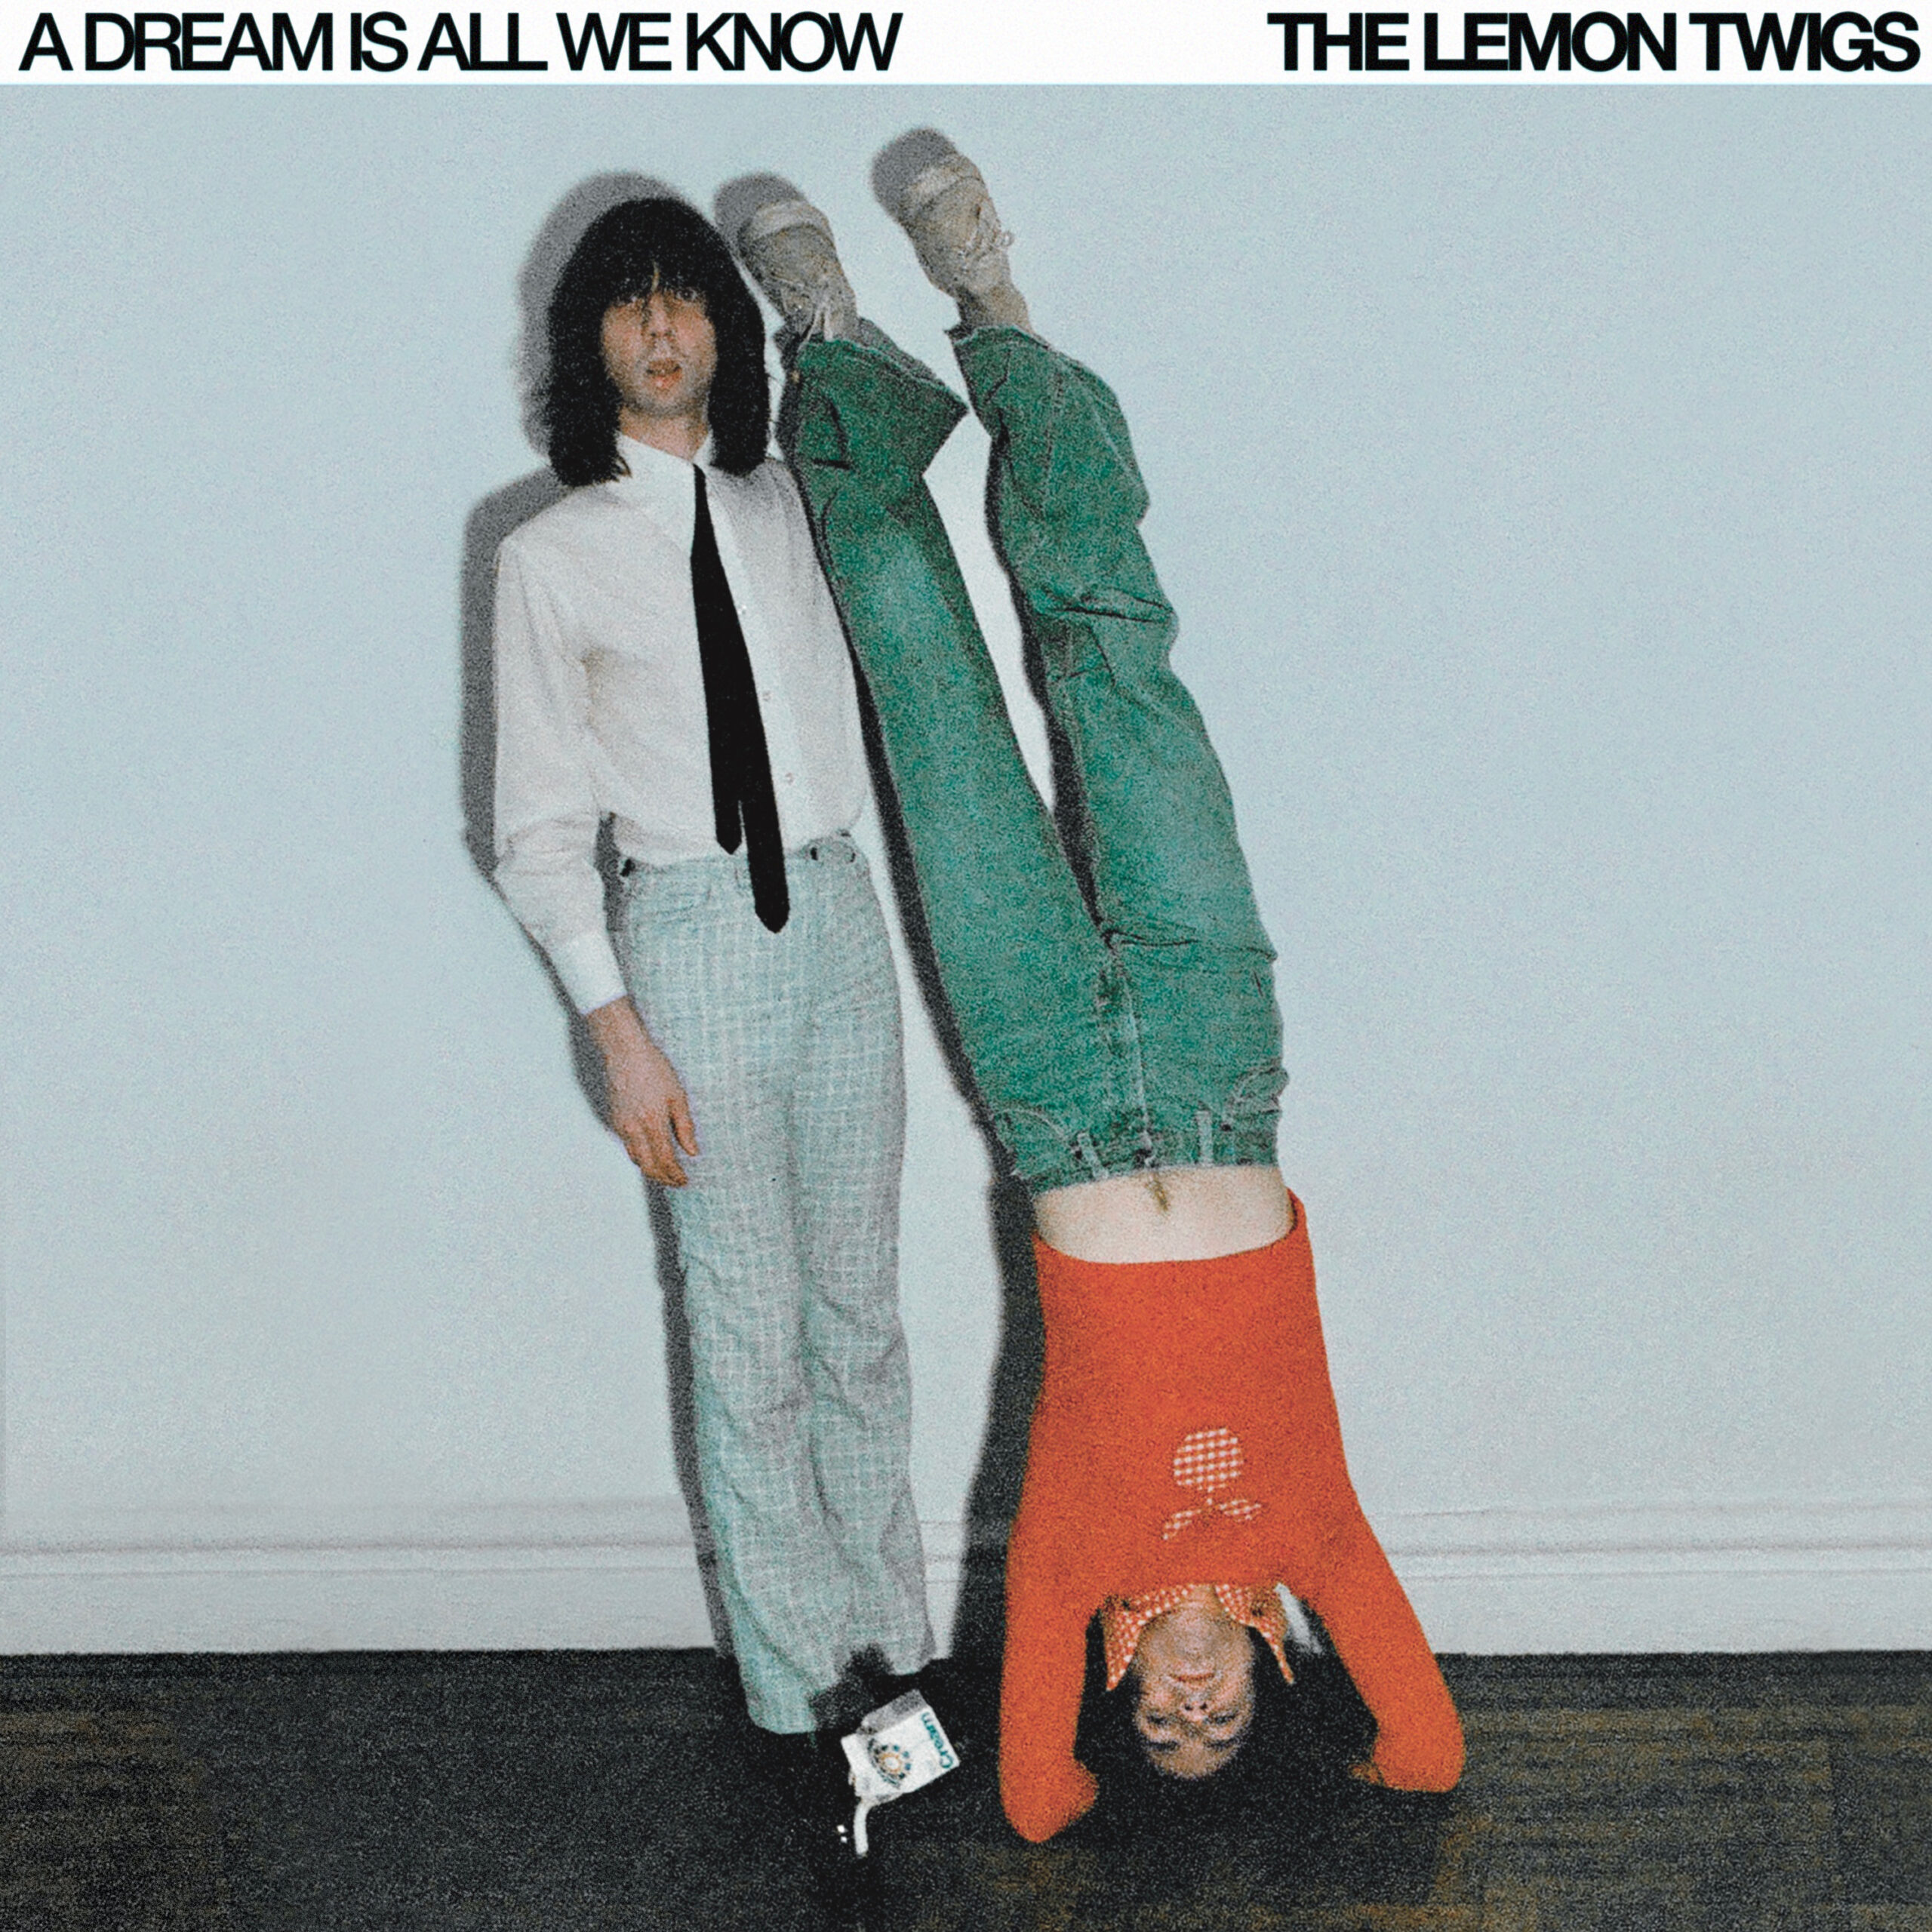 THE LEMON TWIGS – A DREAM IS ALL WE KNOW (CAPTURED TRACKS LP / CD)